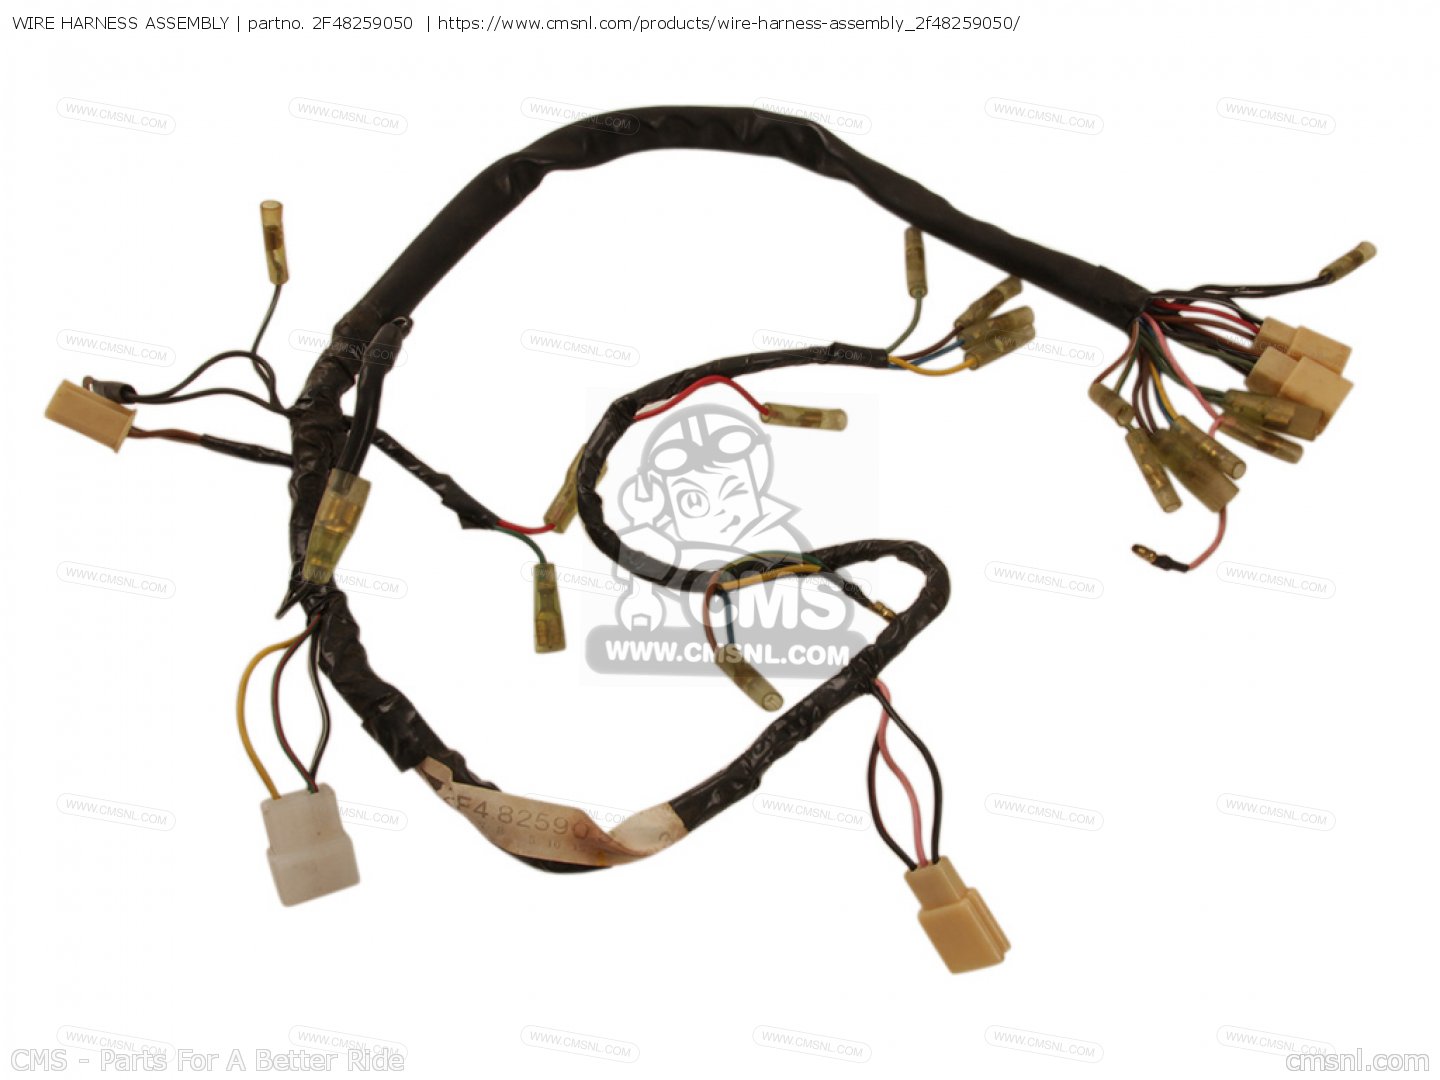 WIRE HARNESS ASSEMBLY for GT80 1978 USA / E-009161 - order at CMSNL